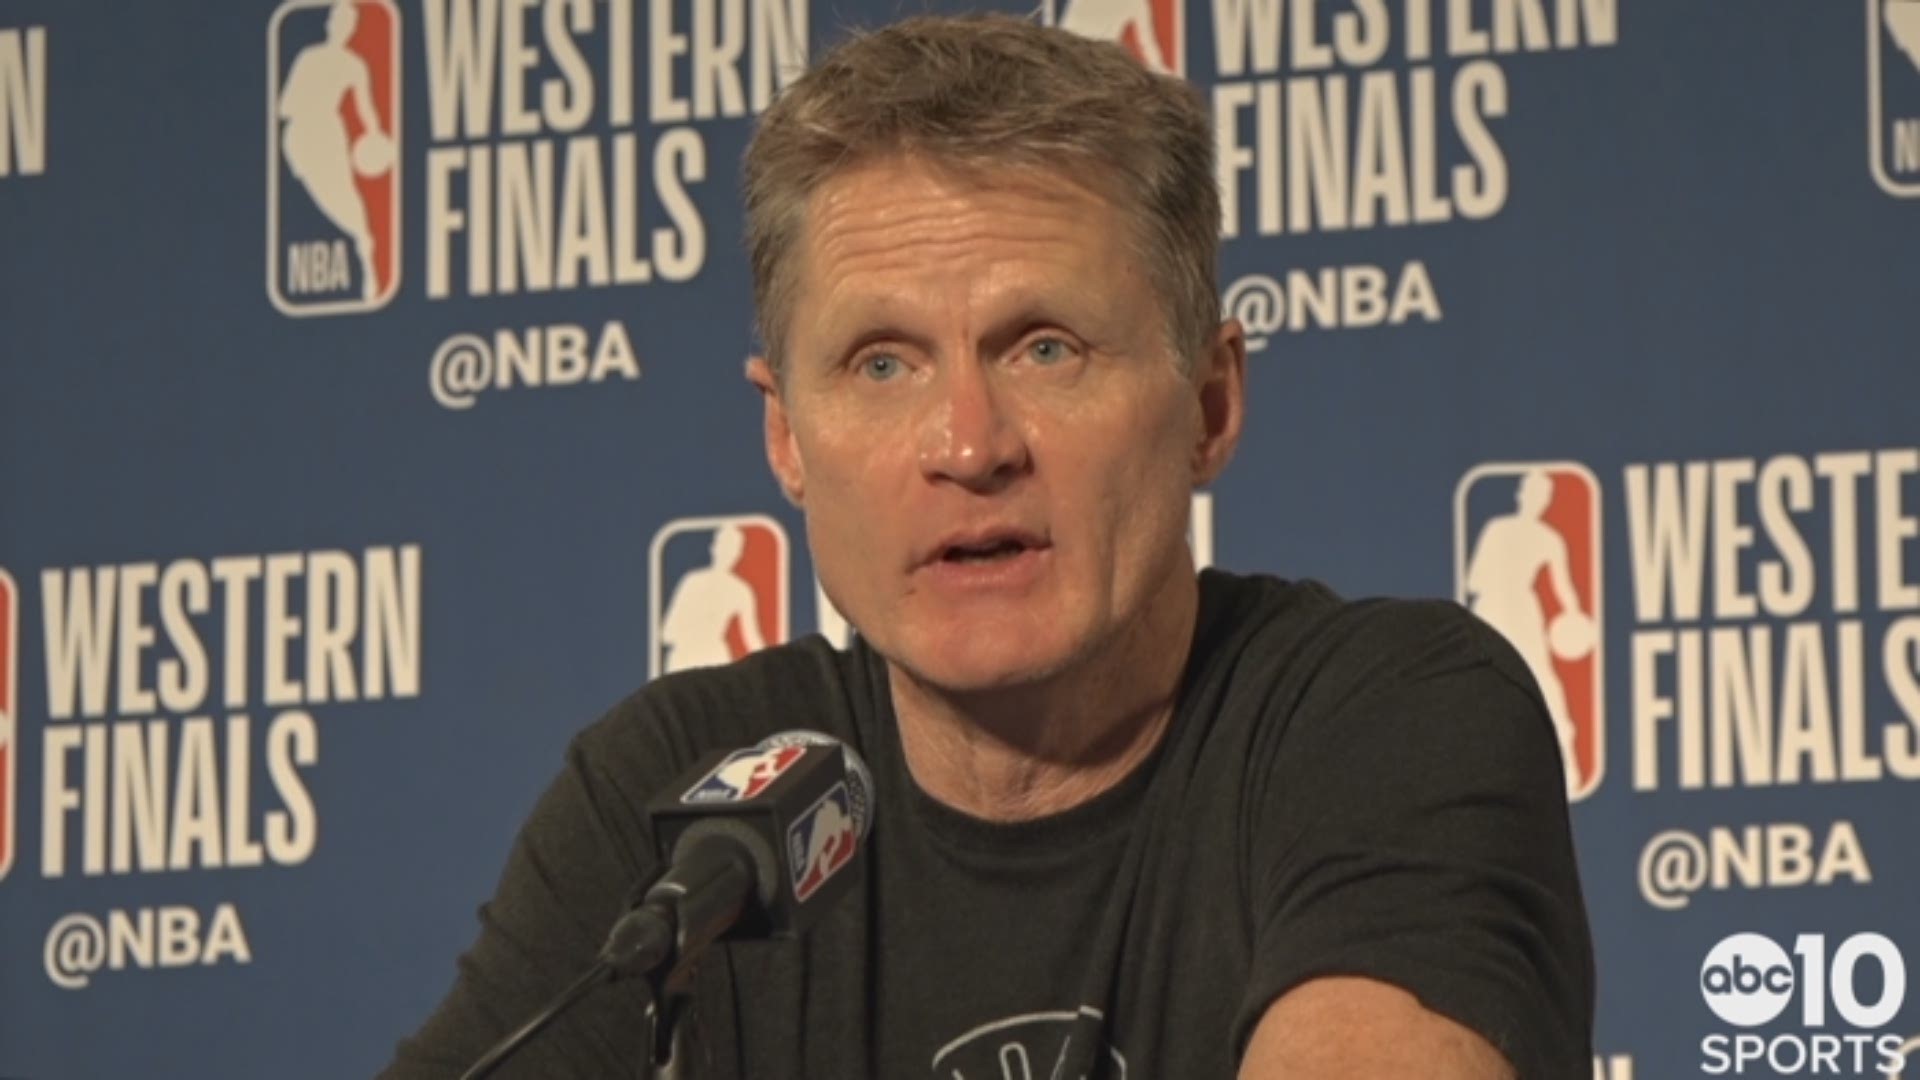 Following Tuesday's Game 4 loss to Houston in the Western Conference Finals to tie the series at 2-2, Golden State Warriors head coach Steve Kerr talks about the poor fourth quarter, a different Rockets team from Game 3 and not getting a timeout late in the contest.